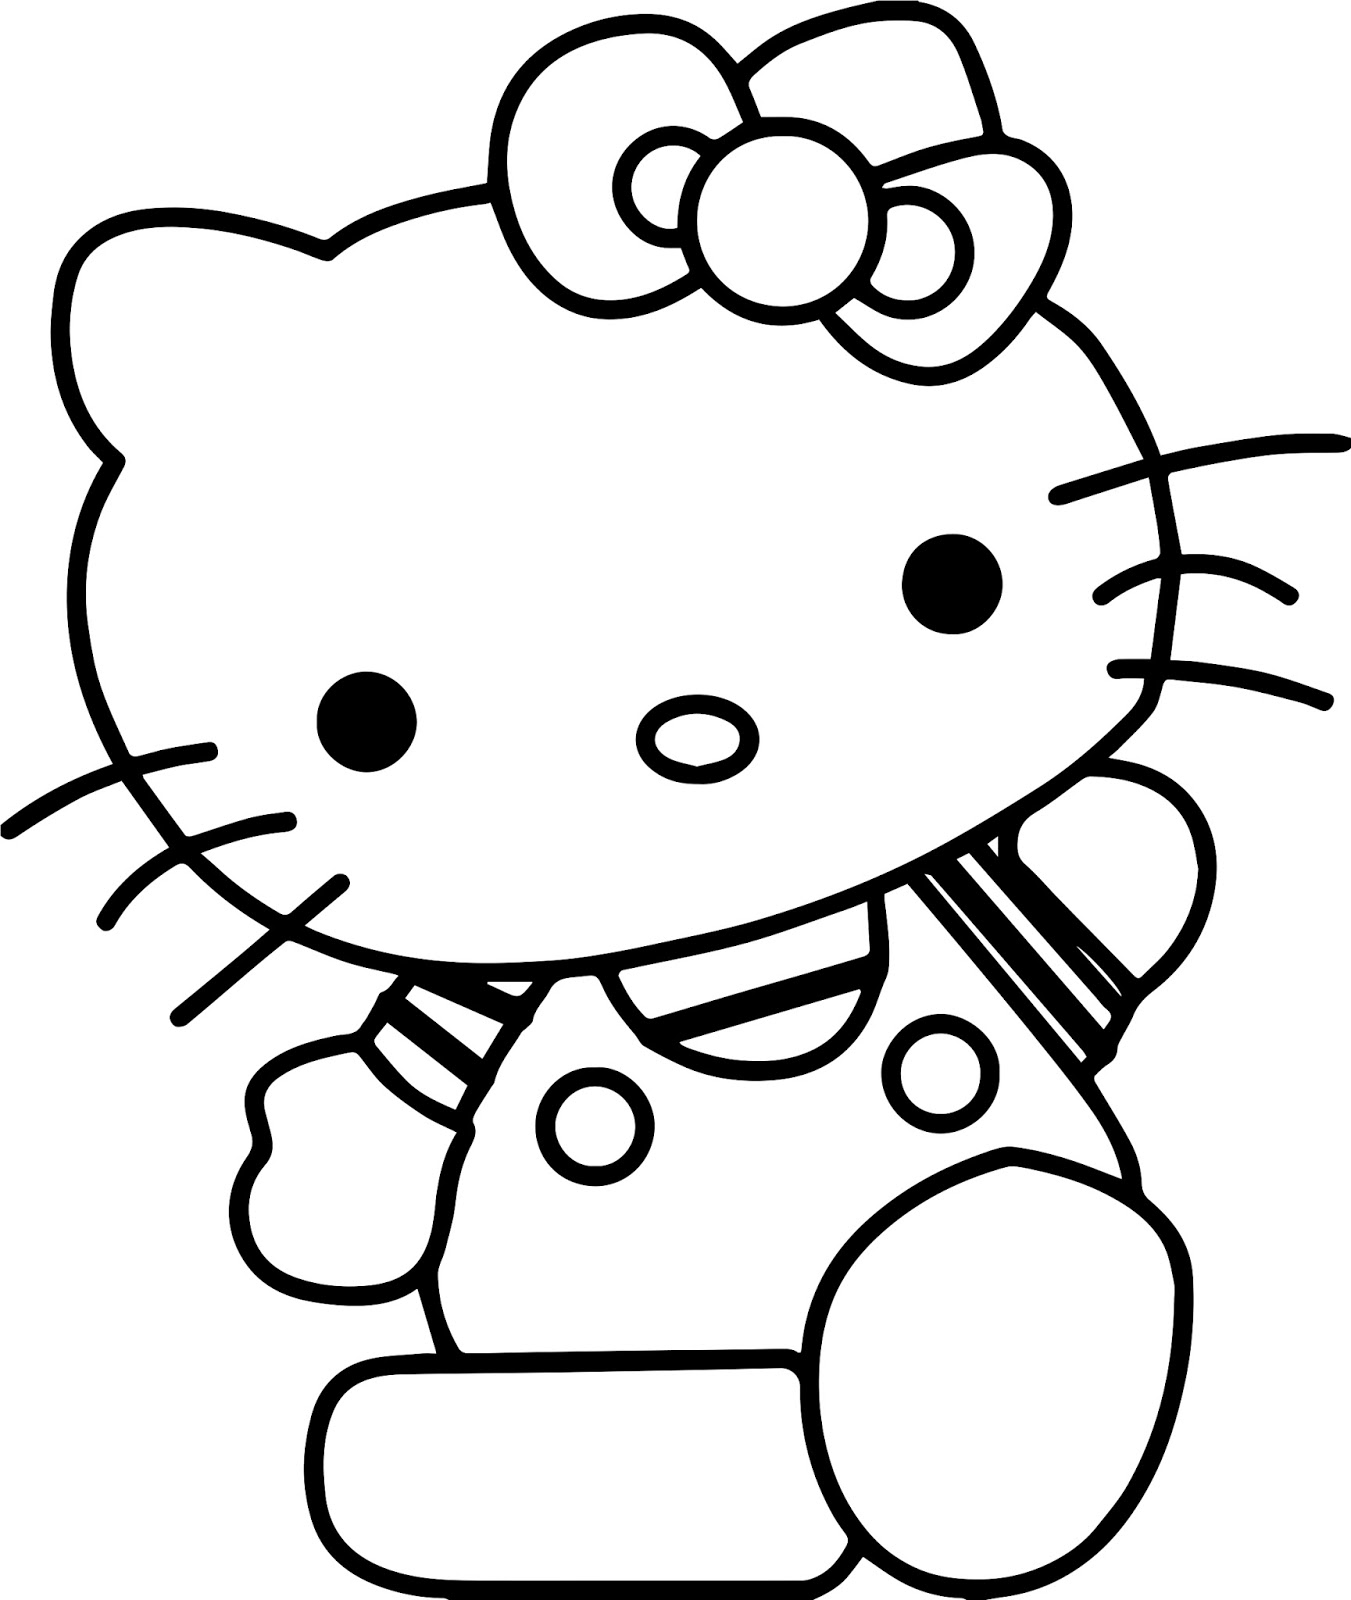 Free Videos For Kids Free Coloring Pages For Kids